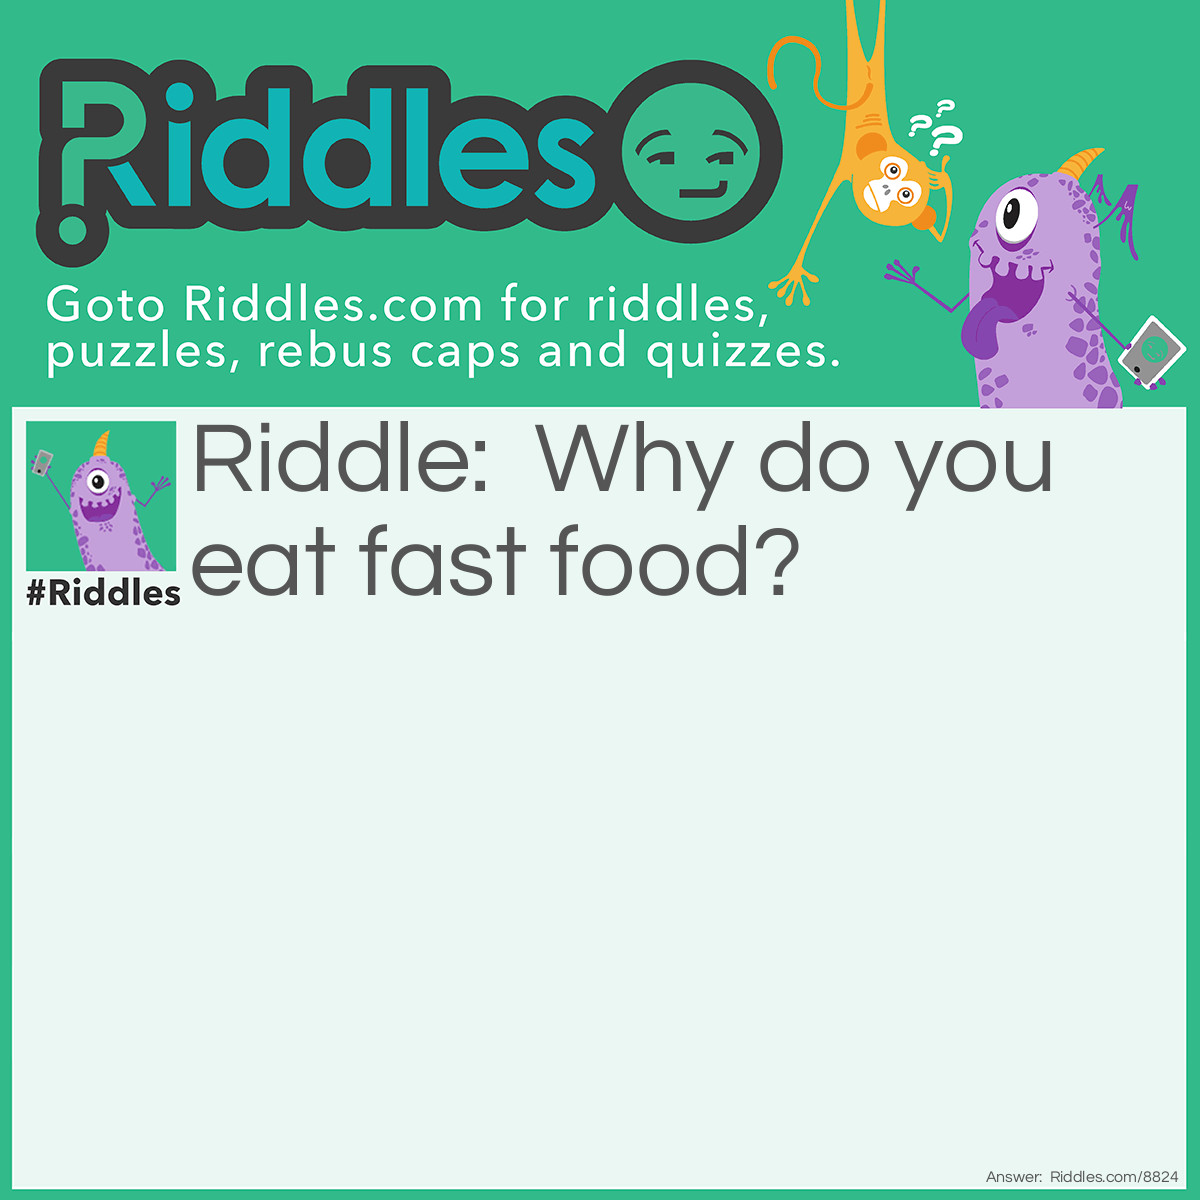 Riddle: Why do you eat fast food? Answer: Because of you in a hurry.